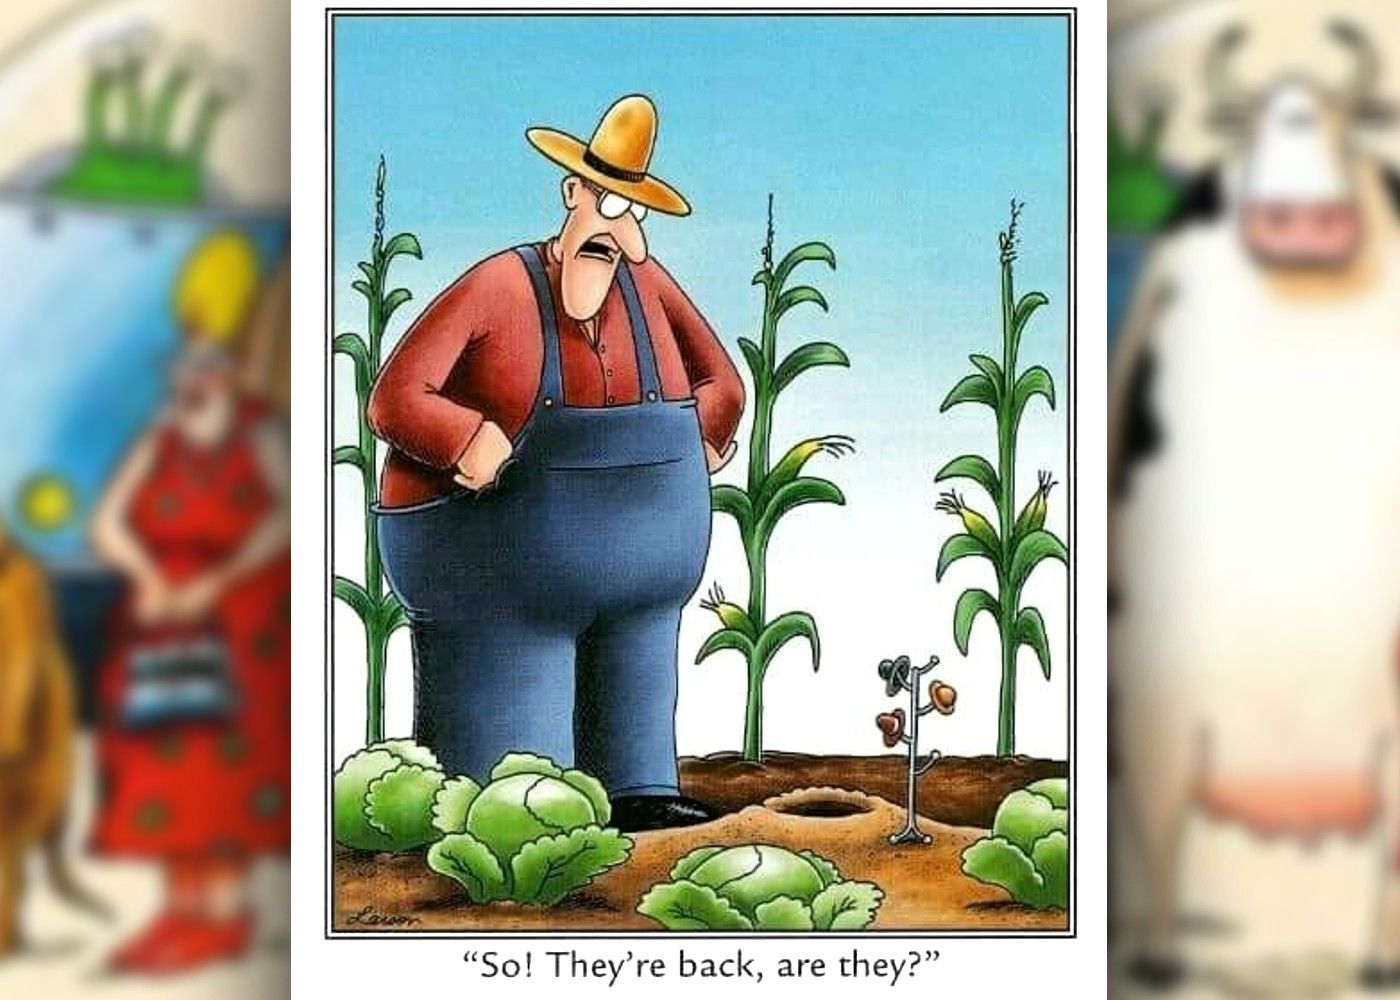 the far side comic where a farmer spots that tiny people have infected his crop